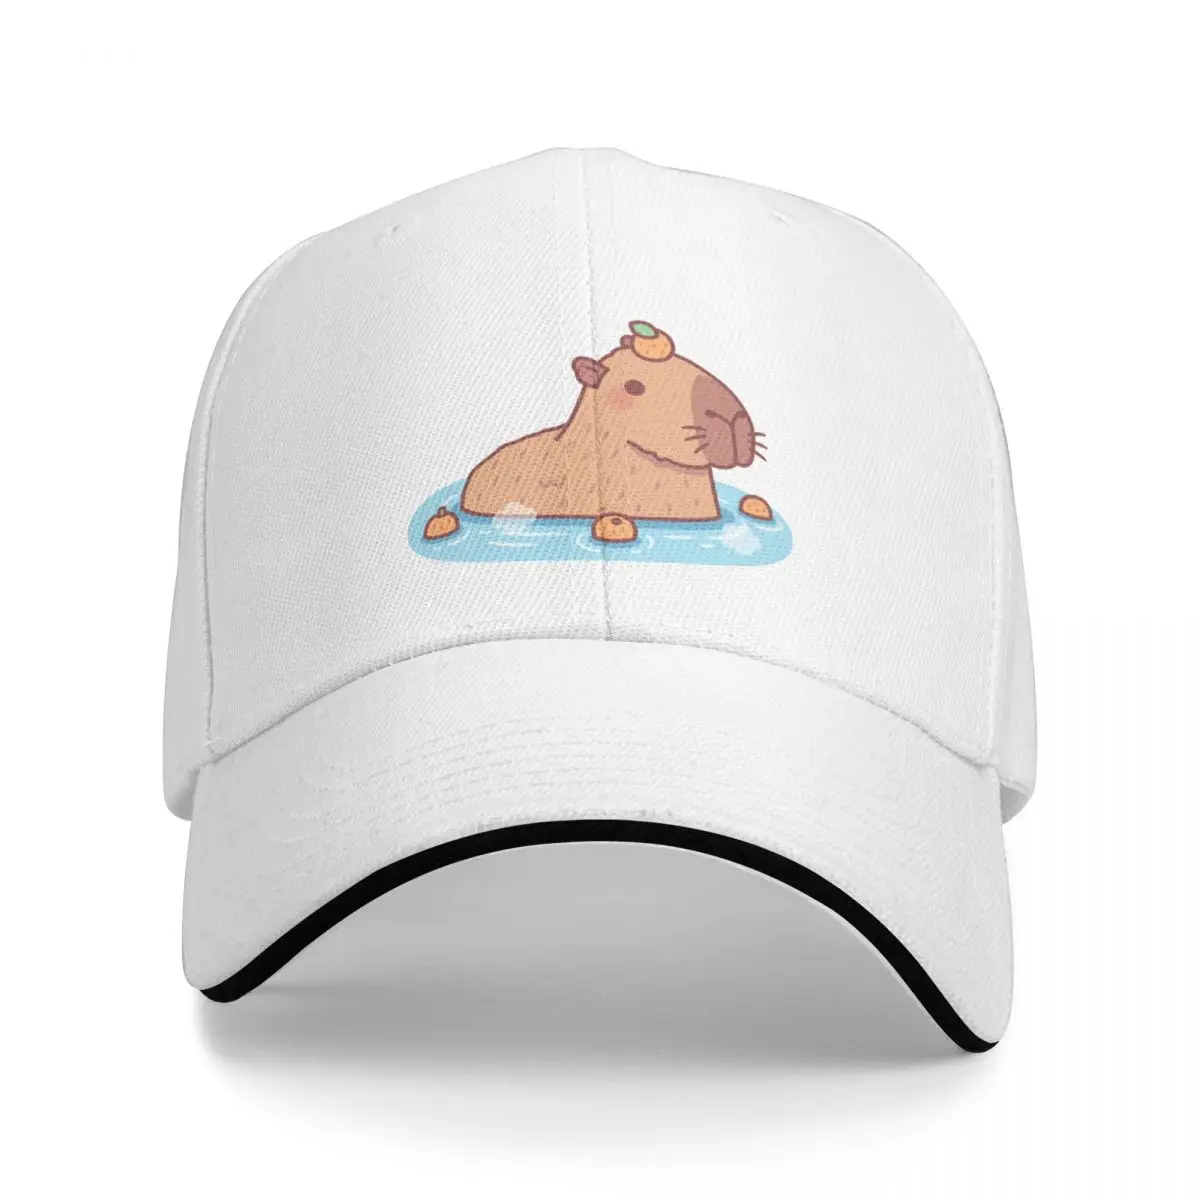 

New Cute Capybara With Orange On Head Chilling In Hot Spring Cap Baseball Cap funny hat Women's golf clothing Men's 1